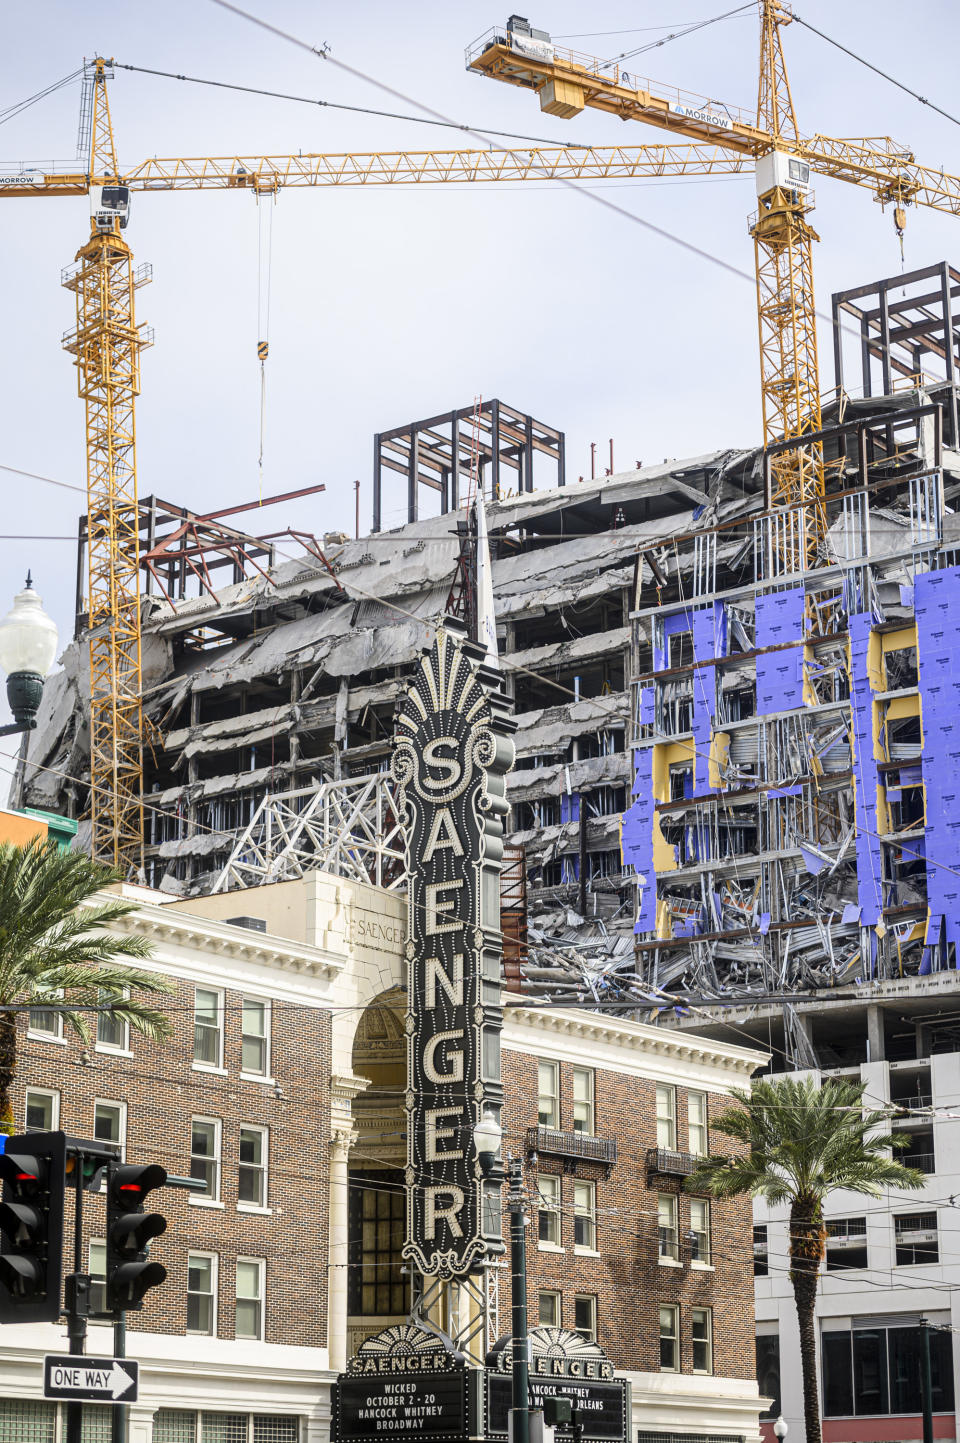 The Hard Rock Hotel partially collapsed onto Canal Street downtown New Orleans, Louisiana on October 12, 2019. - One person died and at least 18 others were injured Saturday when the top floors of a New Orleans hotel that was under construction collapsed, officials said.
The New Orleans fire department received reports at 9:12am local time that the Hard Rock Hotel in downtown New Orleans had collapsed. (Photo by Emily Kask / 30238387A / AFP) (Photo by EMILY KASK/30238387A /AFP via Getty Images)